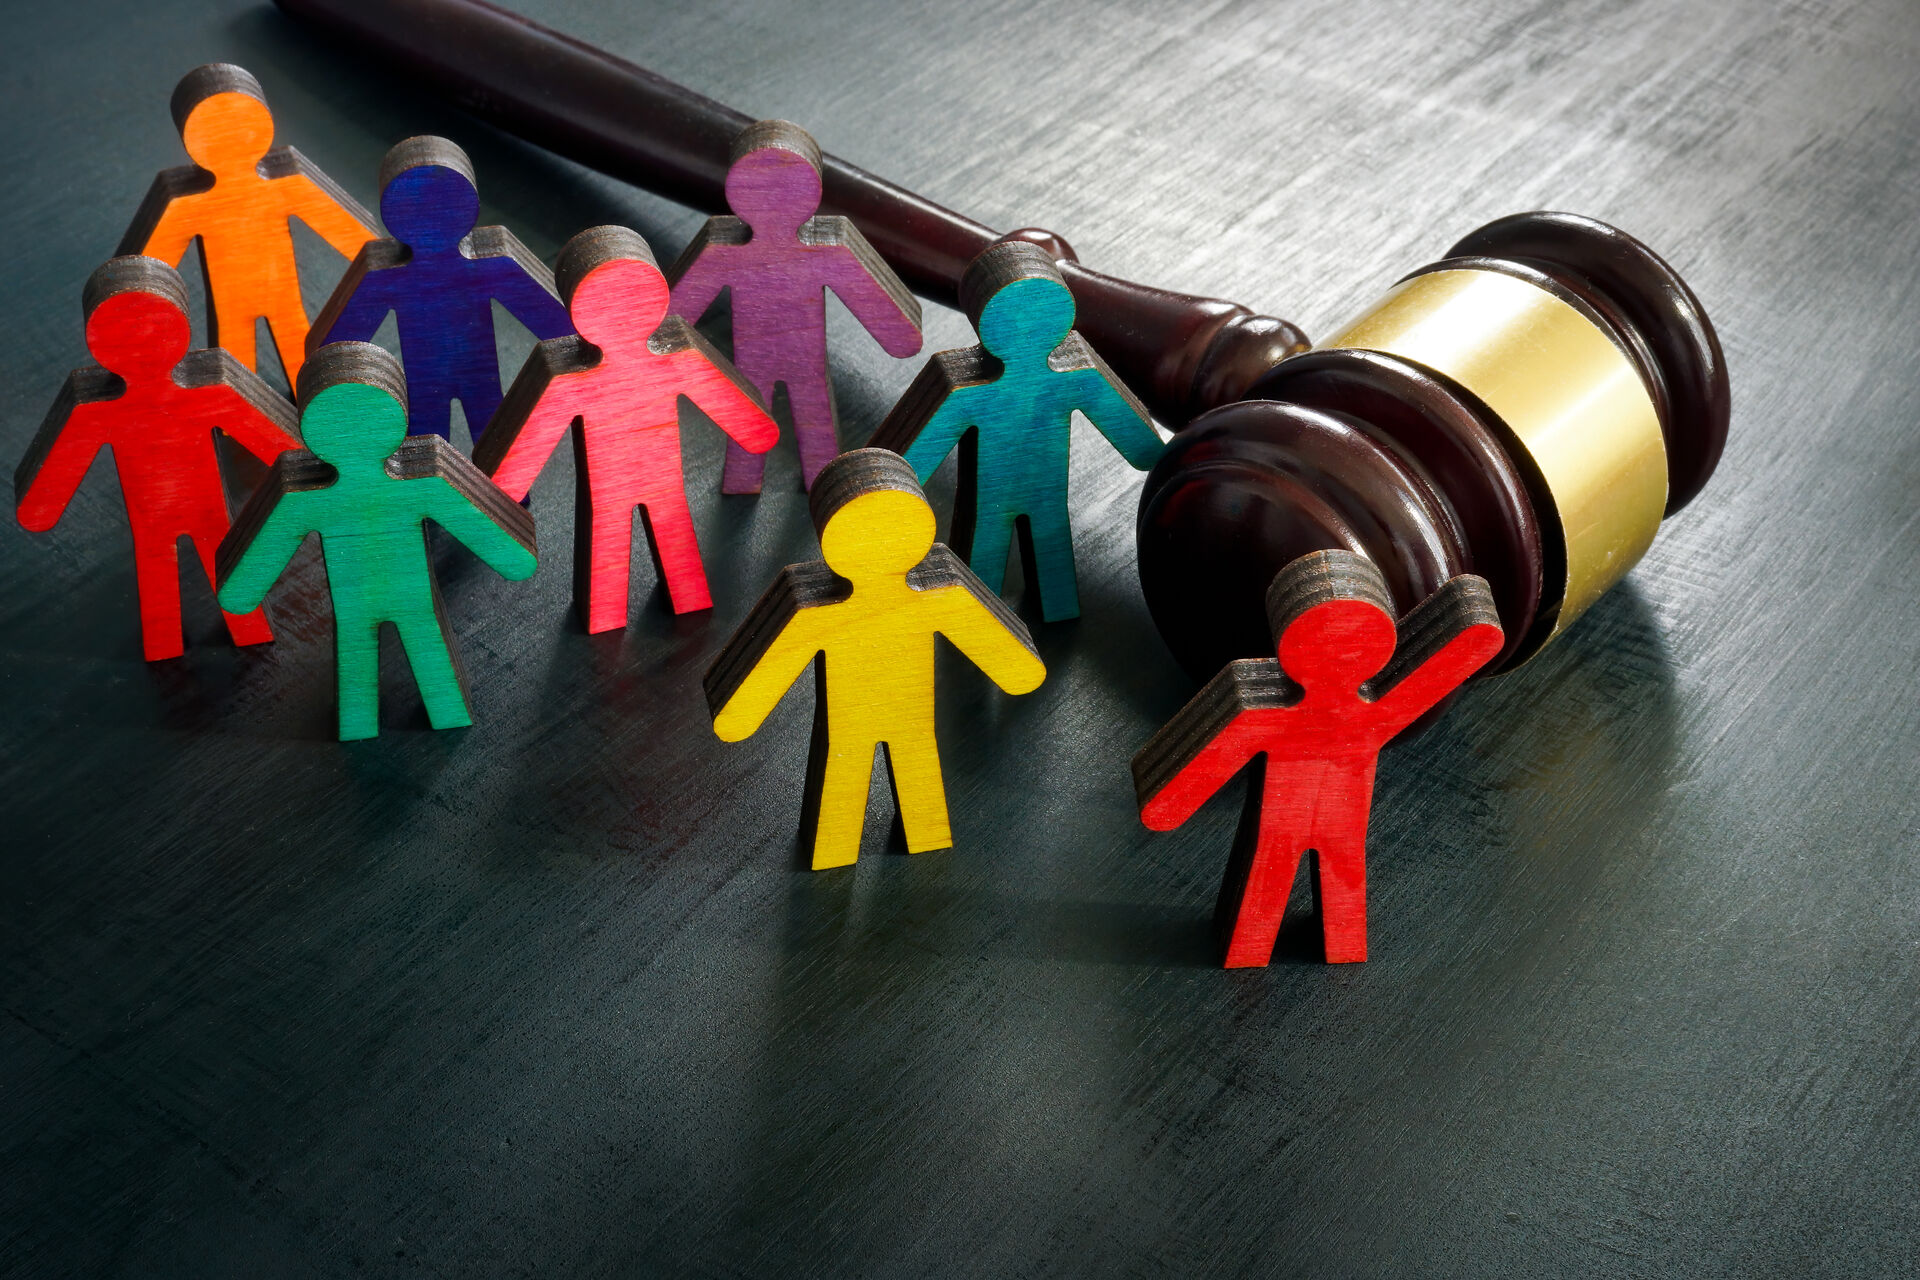 FIllustration photo of a law hammer and figures representing persons with differences.